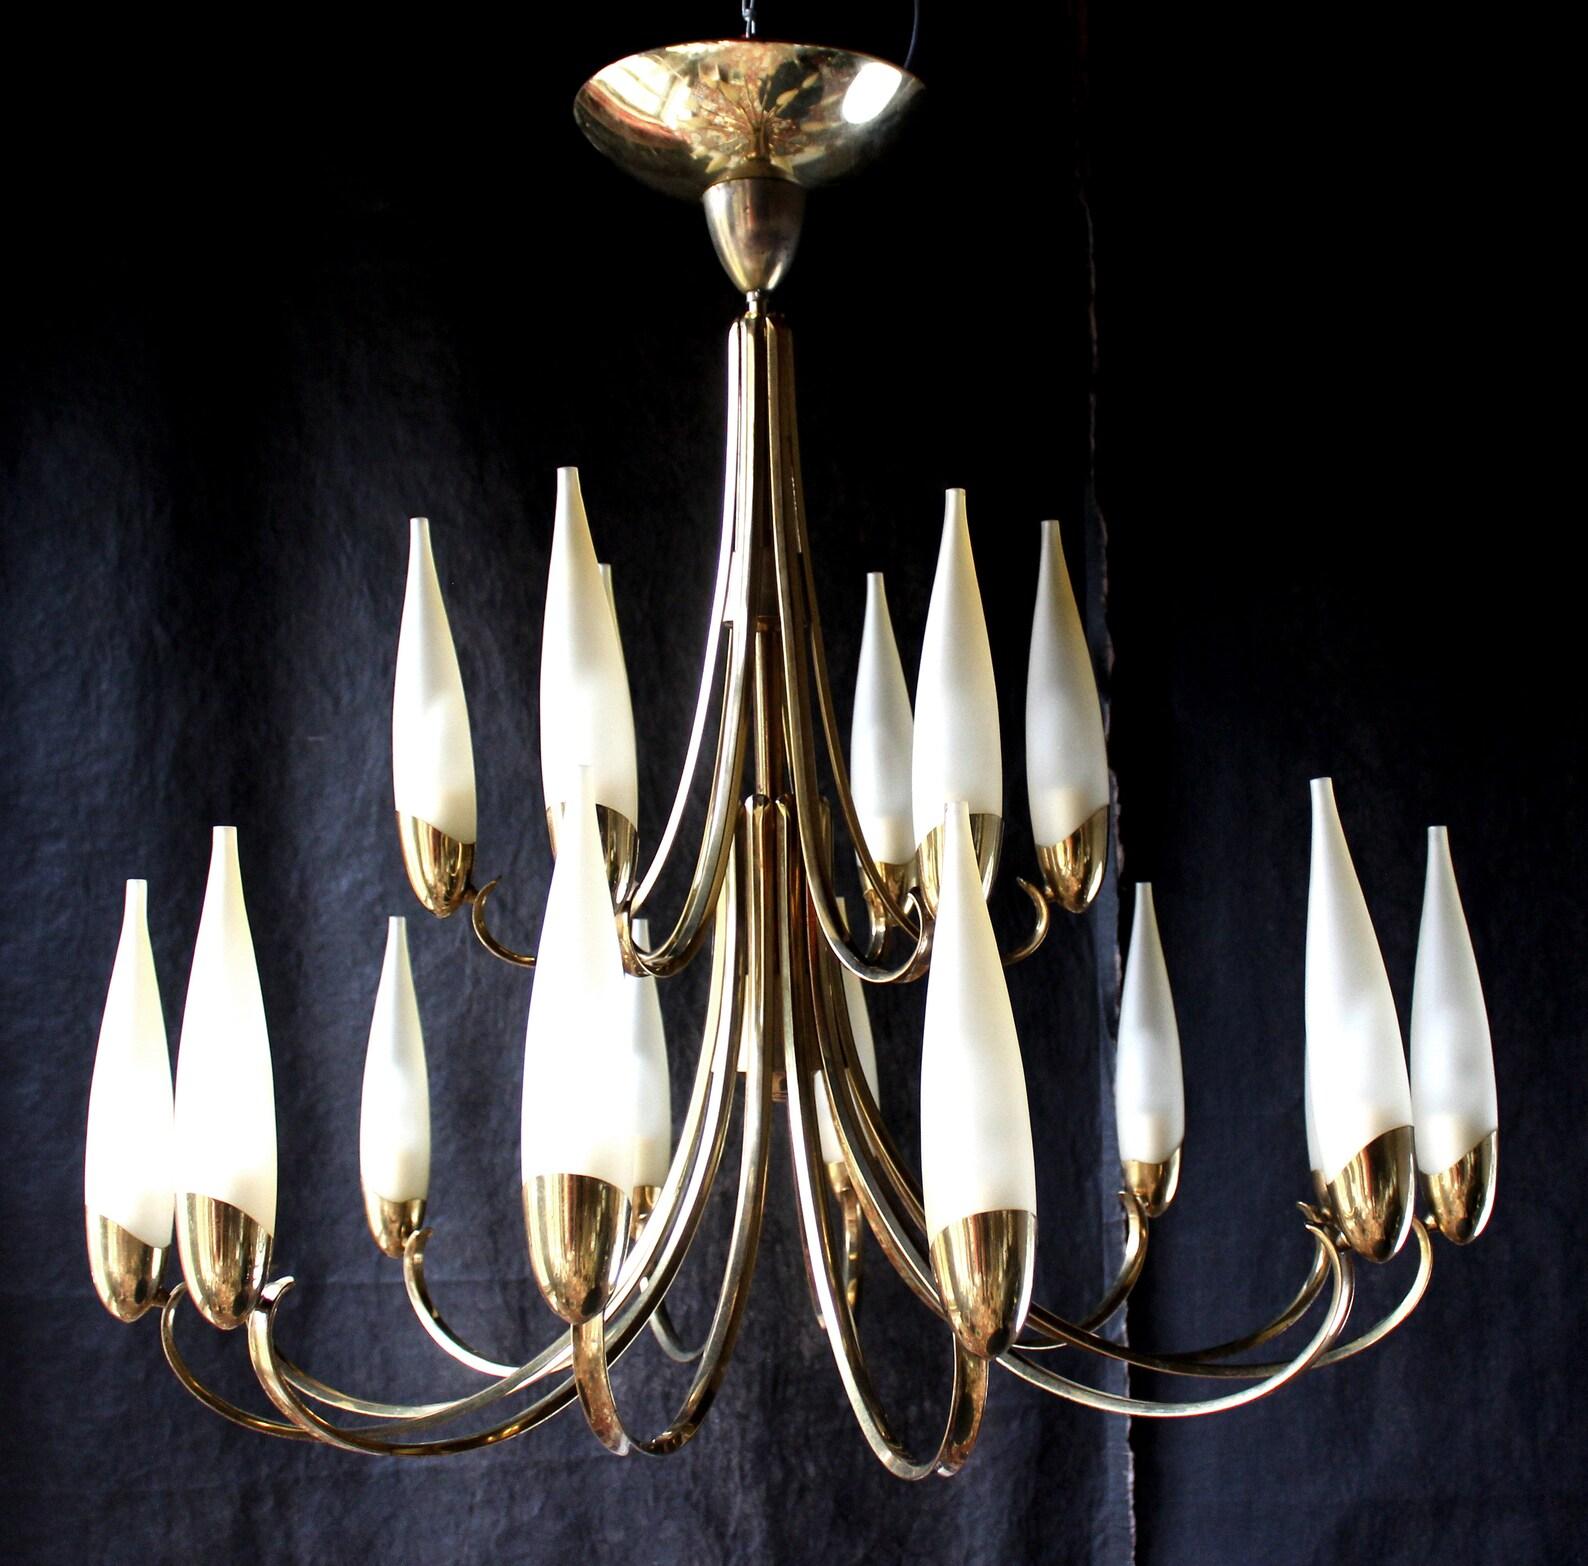 18 Lights great Italian palace chandelier - 1956- STILNOVO

Polished brass & frosted pearl glass blossoms
Diameter 37,5